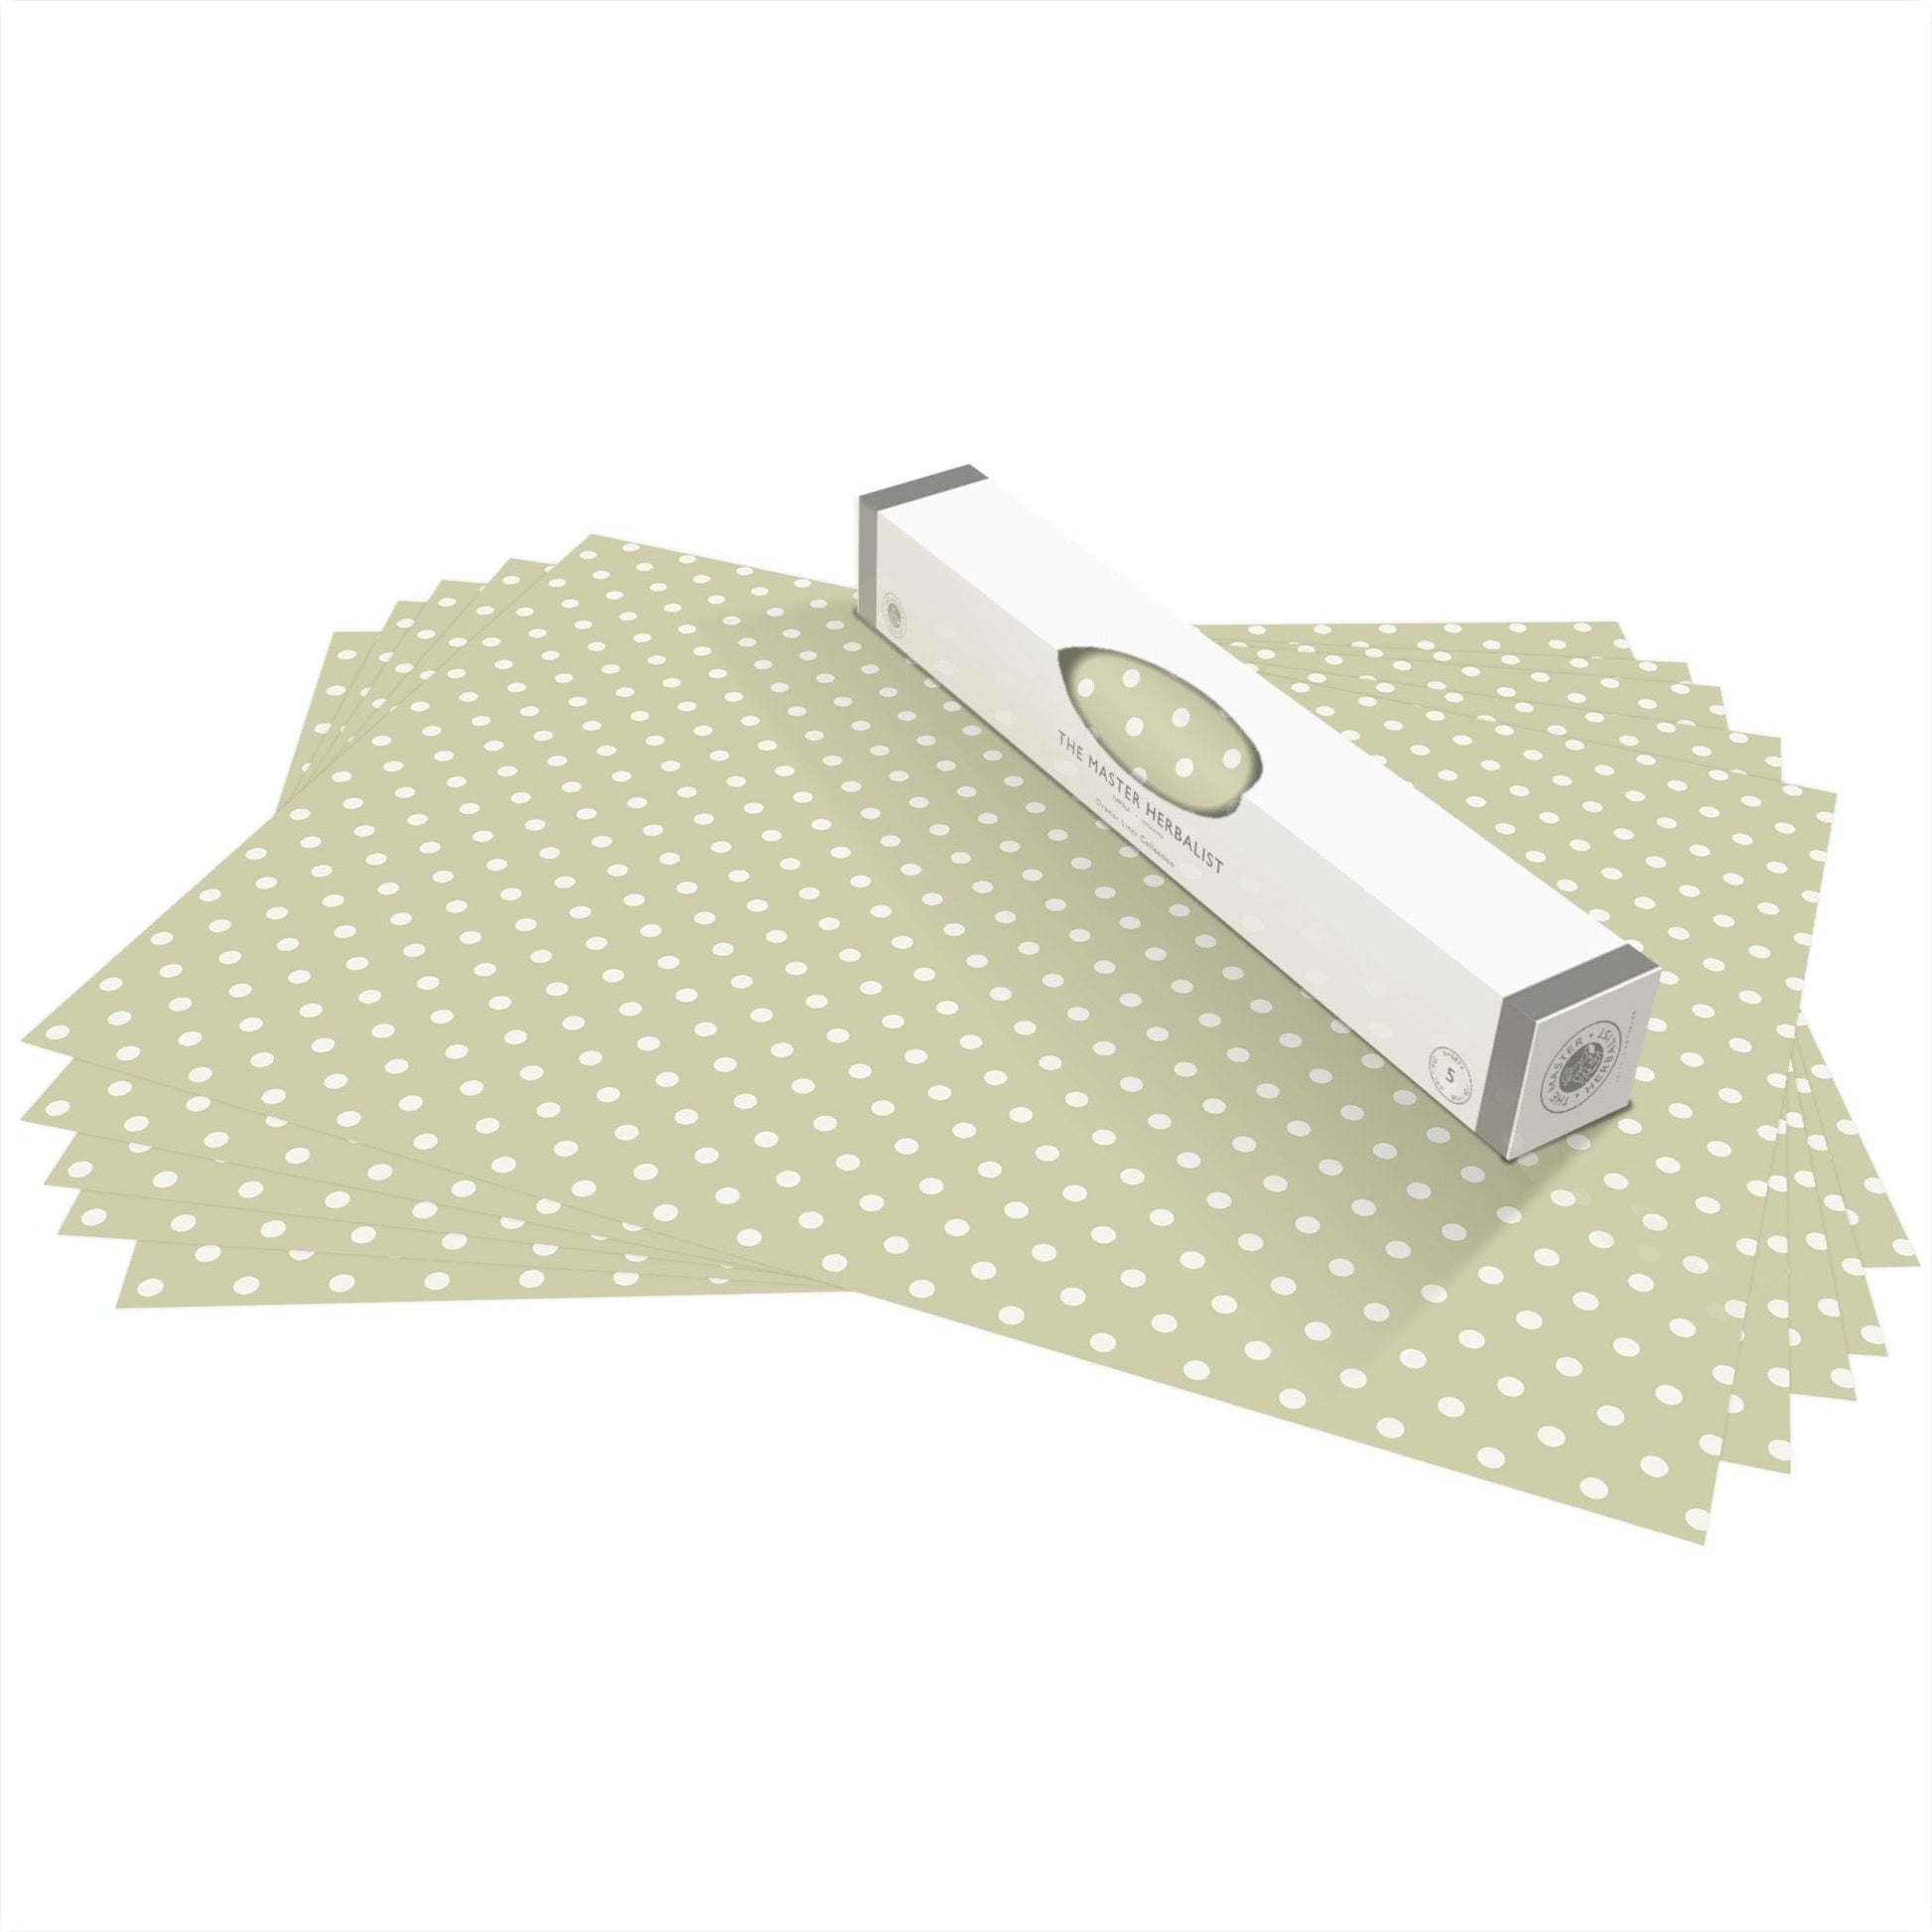 SIMPLY DRAWER LINERS | Wipe Clean & Unscented Drawer Liners in a SAGE GREEN POLKA DOT Design. Perfect for Kitchen Drawers, Shelves, Cupboards & Cabinets. Made in Suffolk, England. (Sage Green)